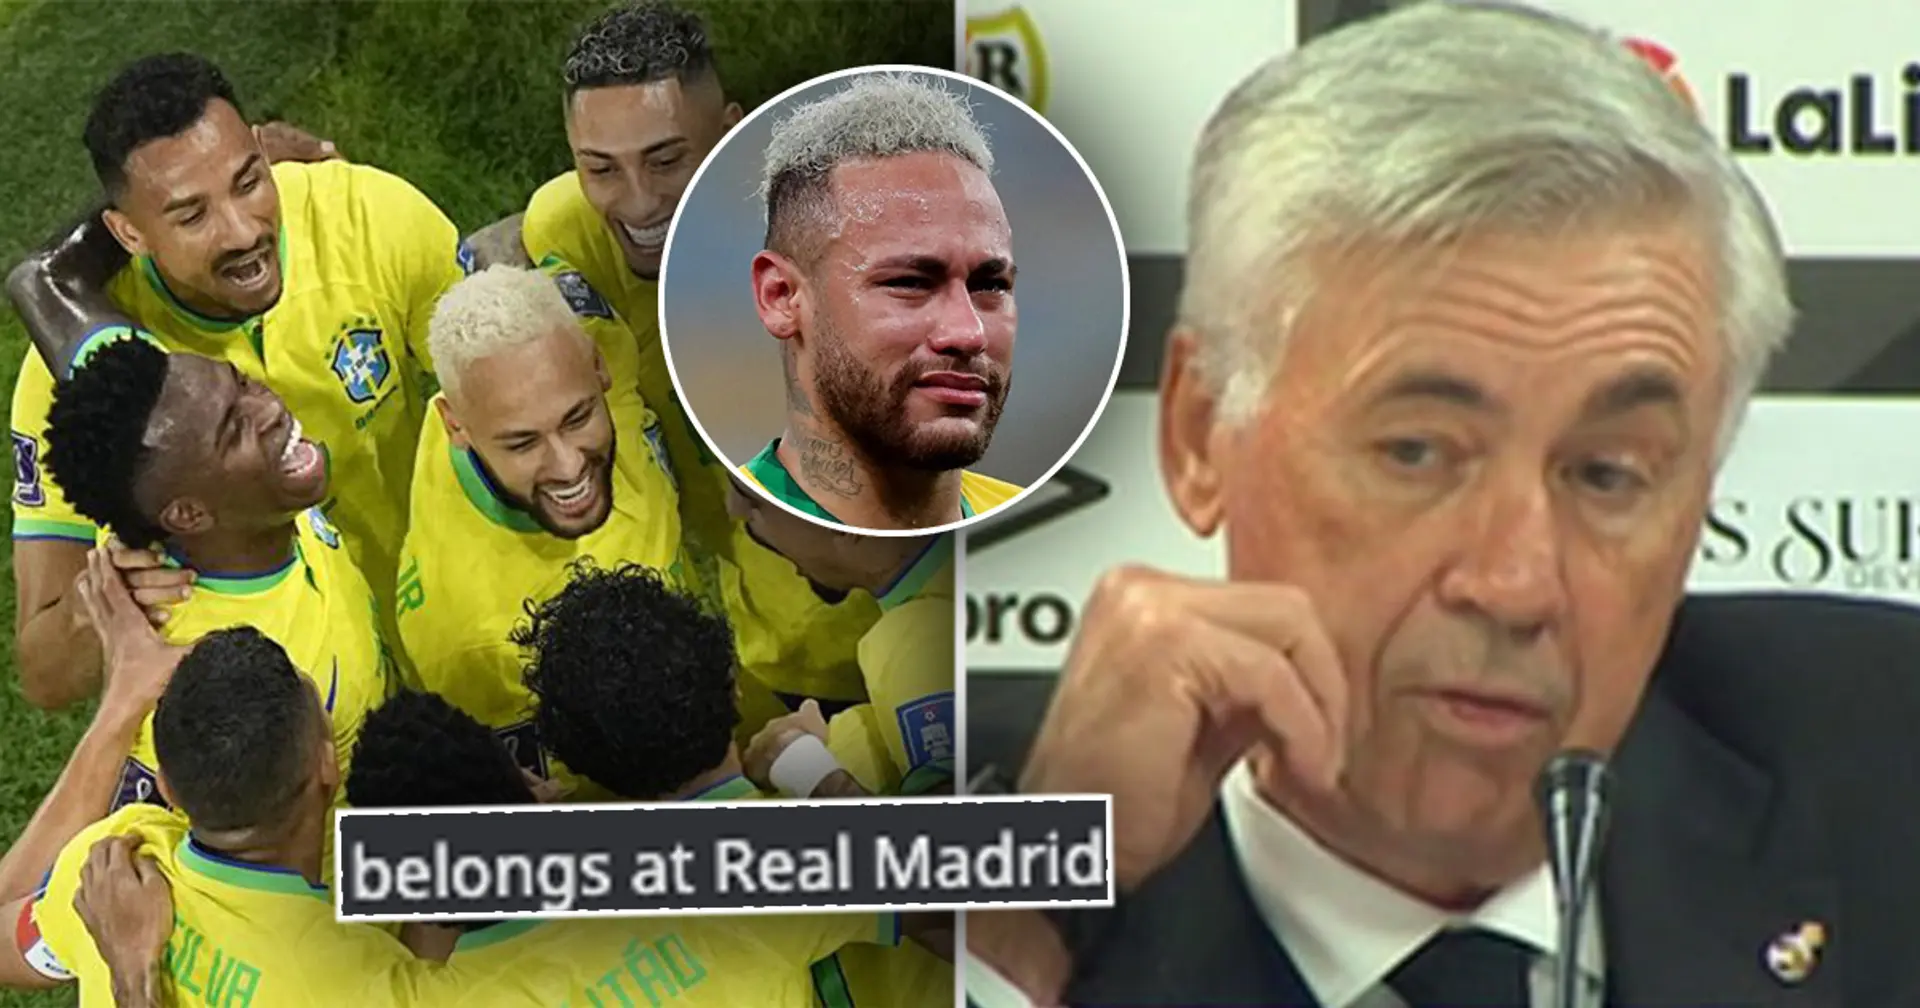 'Will be our player by 2023-24': Fans want Brazil star at Real Madrid - he's rated above Neymar at World Cup